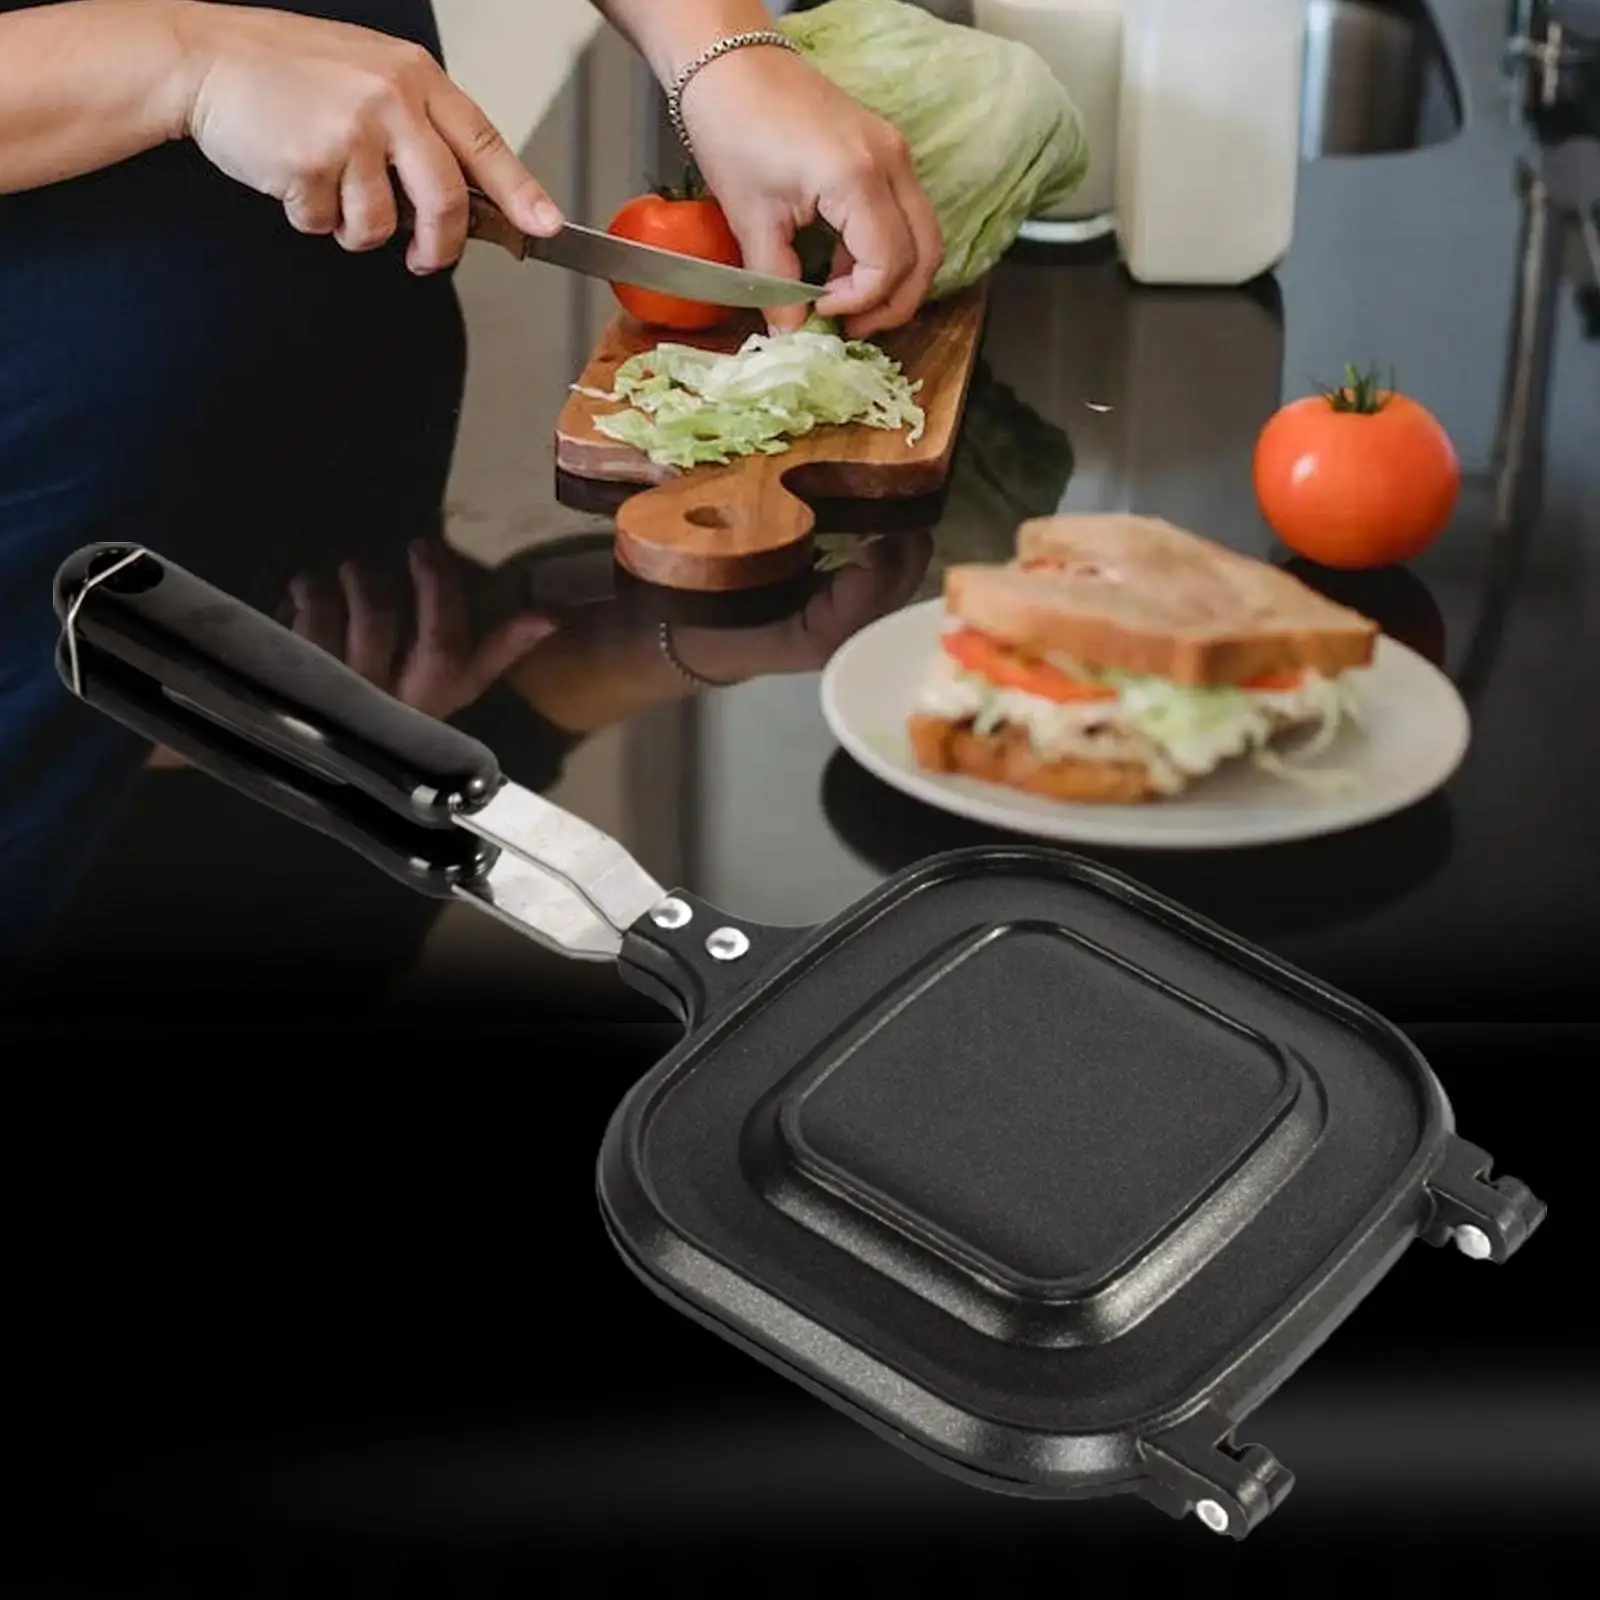 Sandwiches Maker Double Sided Heating with Heat Resistant Handles Grill Pan Frying Egg Ham Bread Toast Maker for Gas Stove